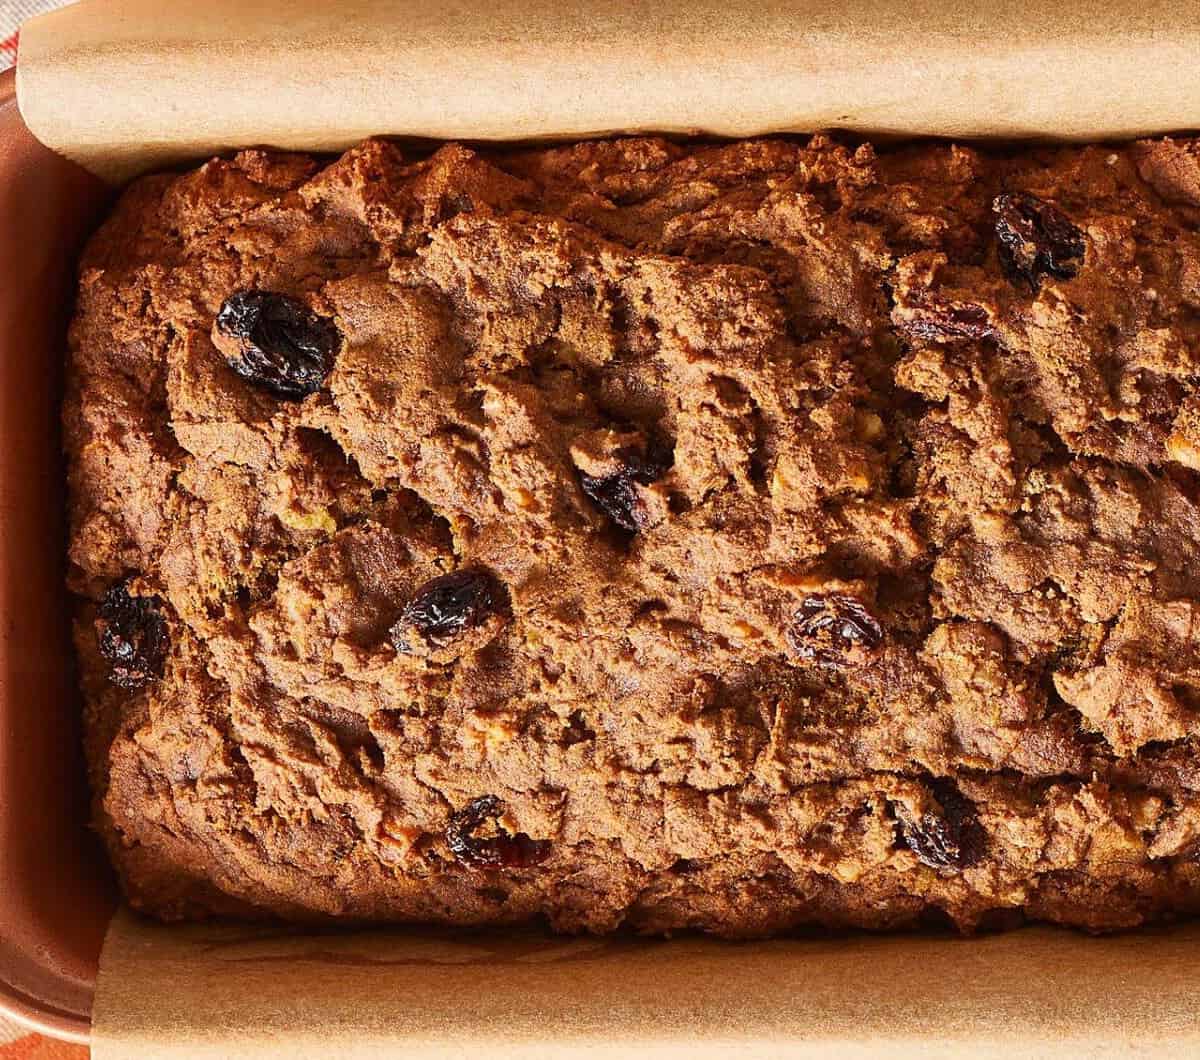  The aroma of freshly baked banana bread wafts through the air